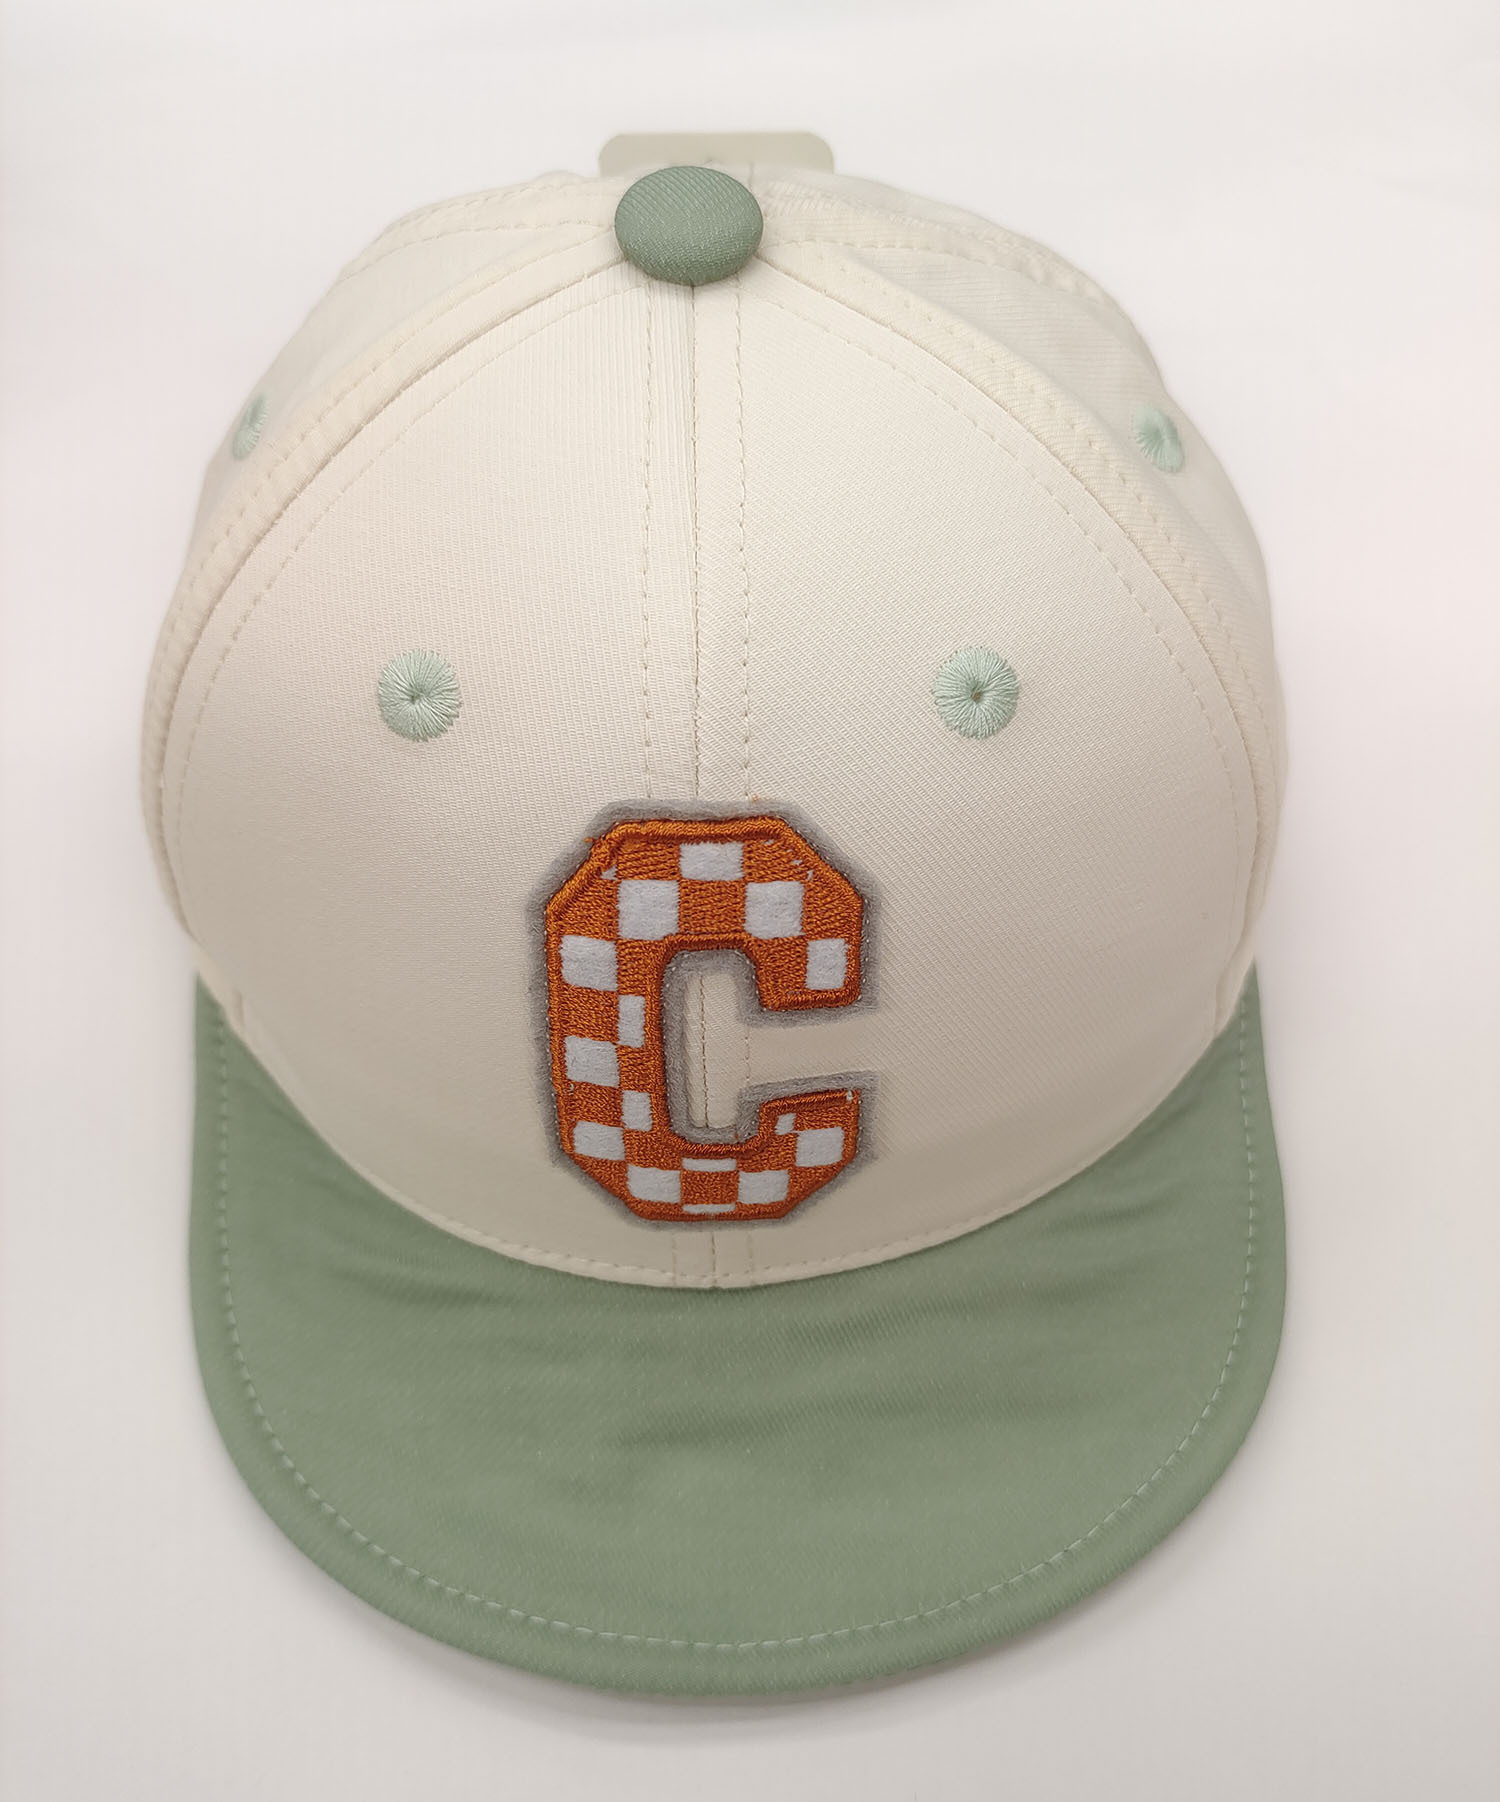 Children's Hat with Tongue Cap Children's Peaked Cap Dudula Spring Embroidery Hat with Tongue Cap